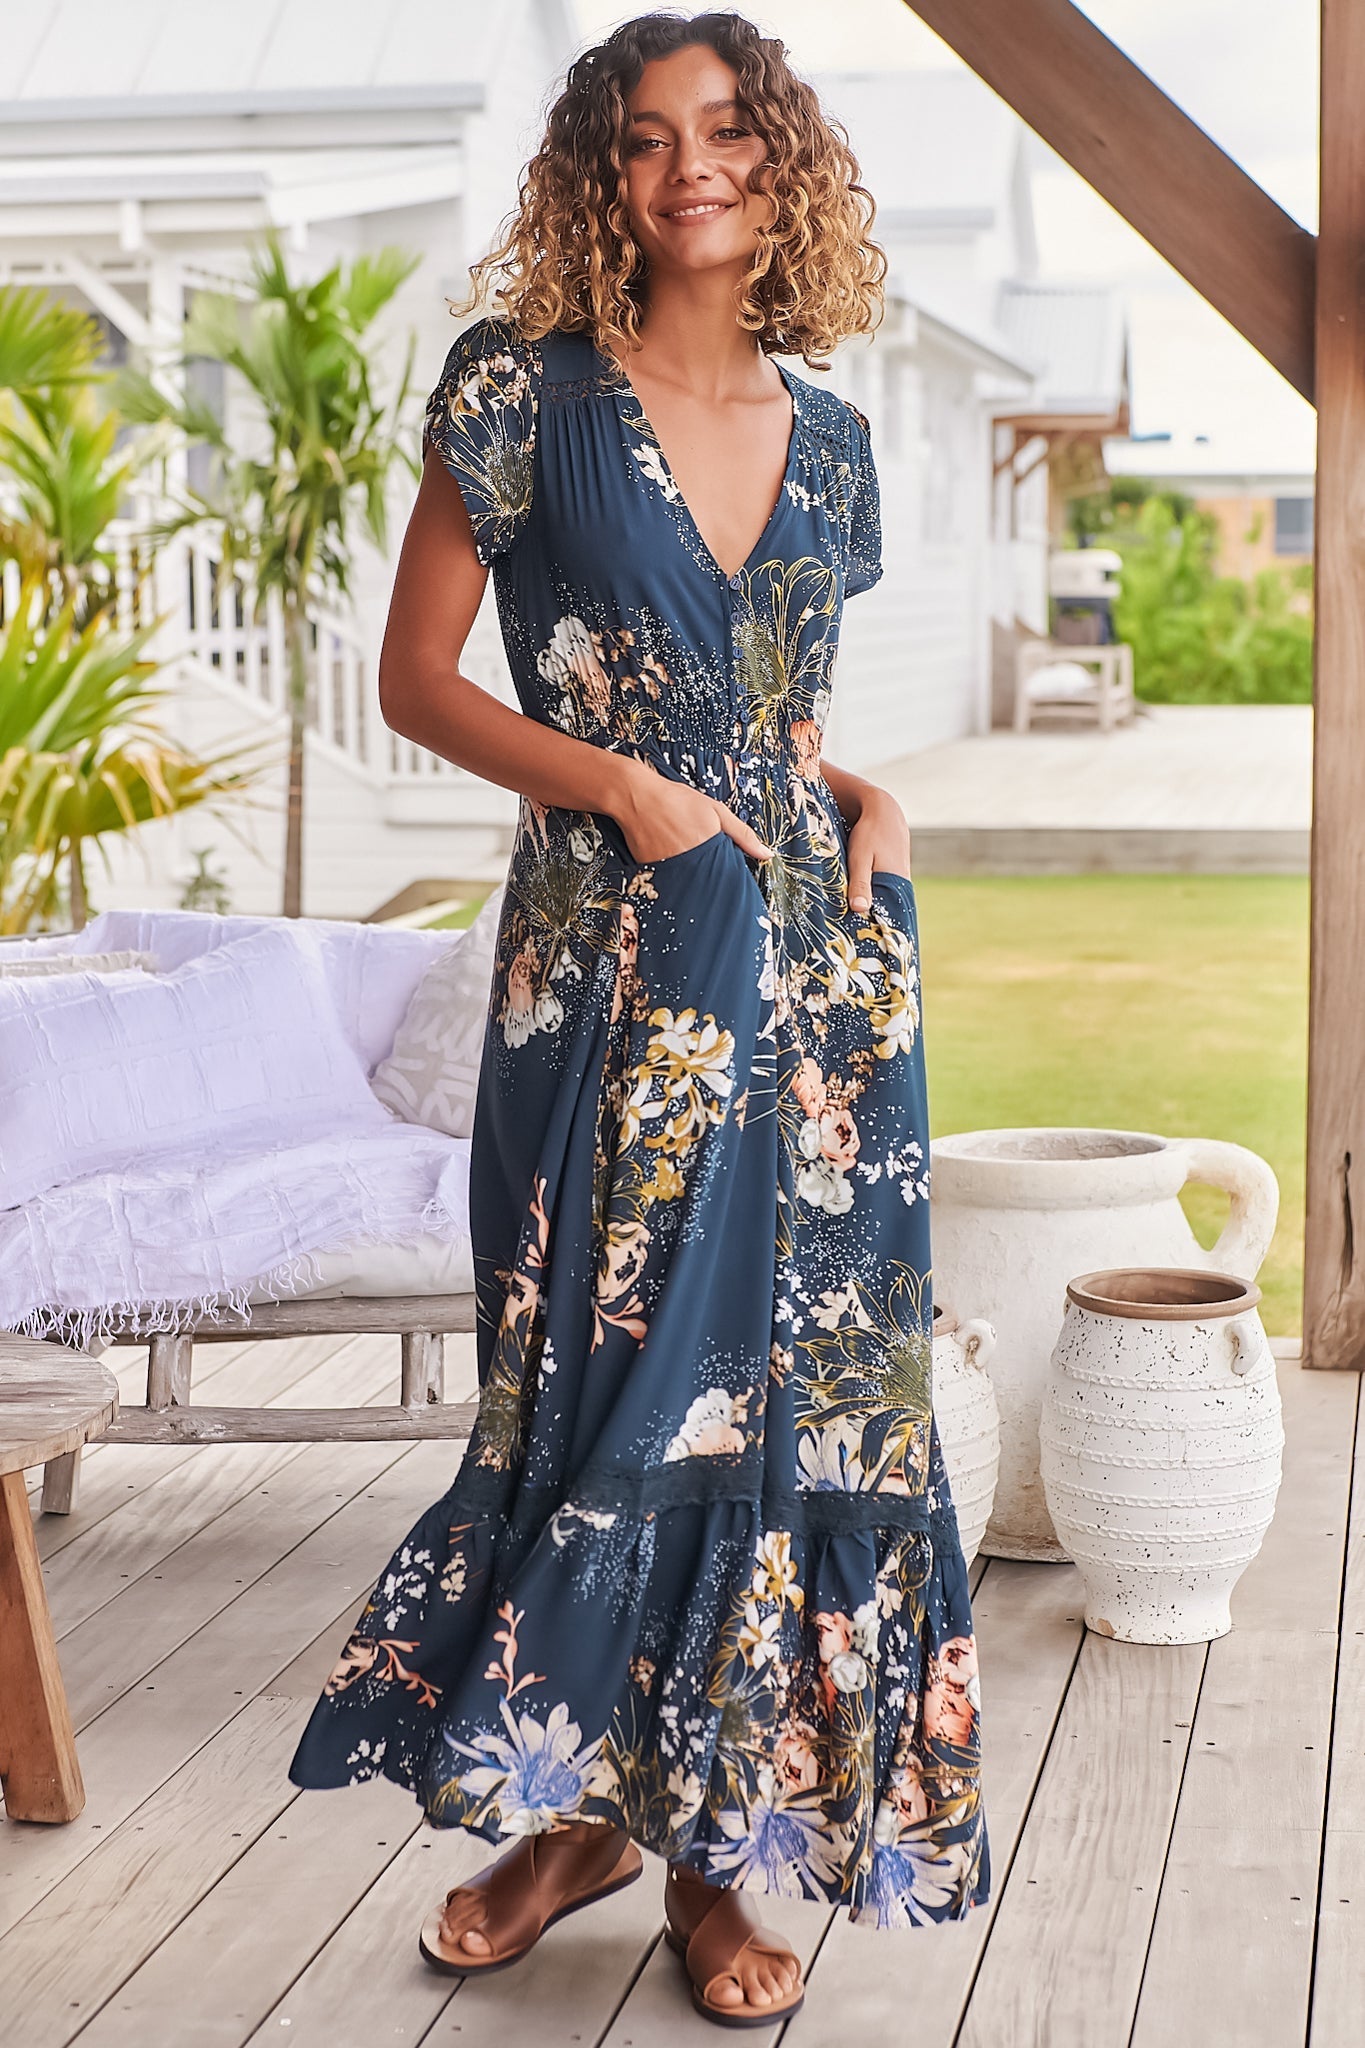 JAASE - Carmen Maxi Dress: Butterfly Cap Sleeve Button Down A Line Dress with Lace Trim in Indigo Print